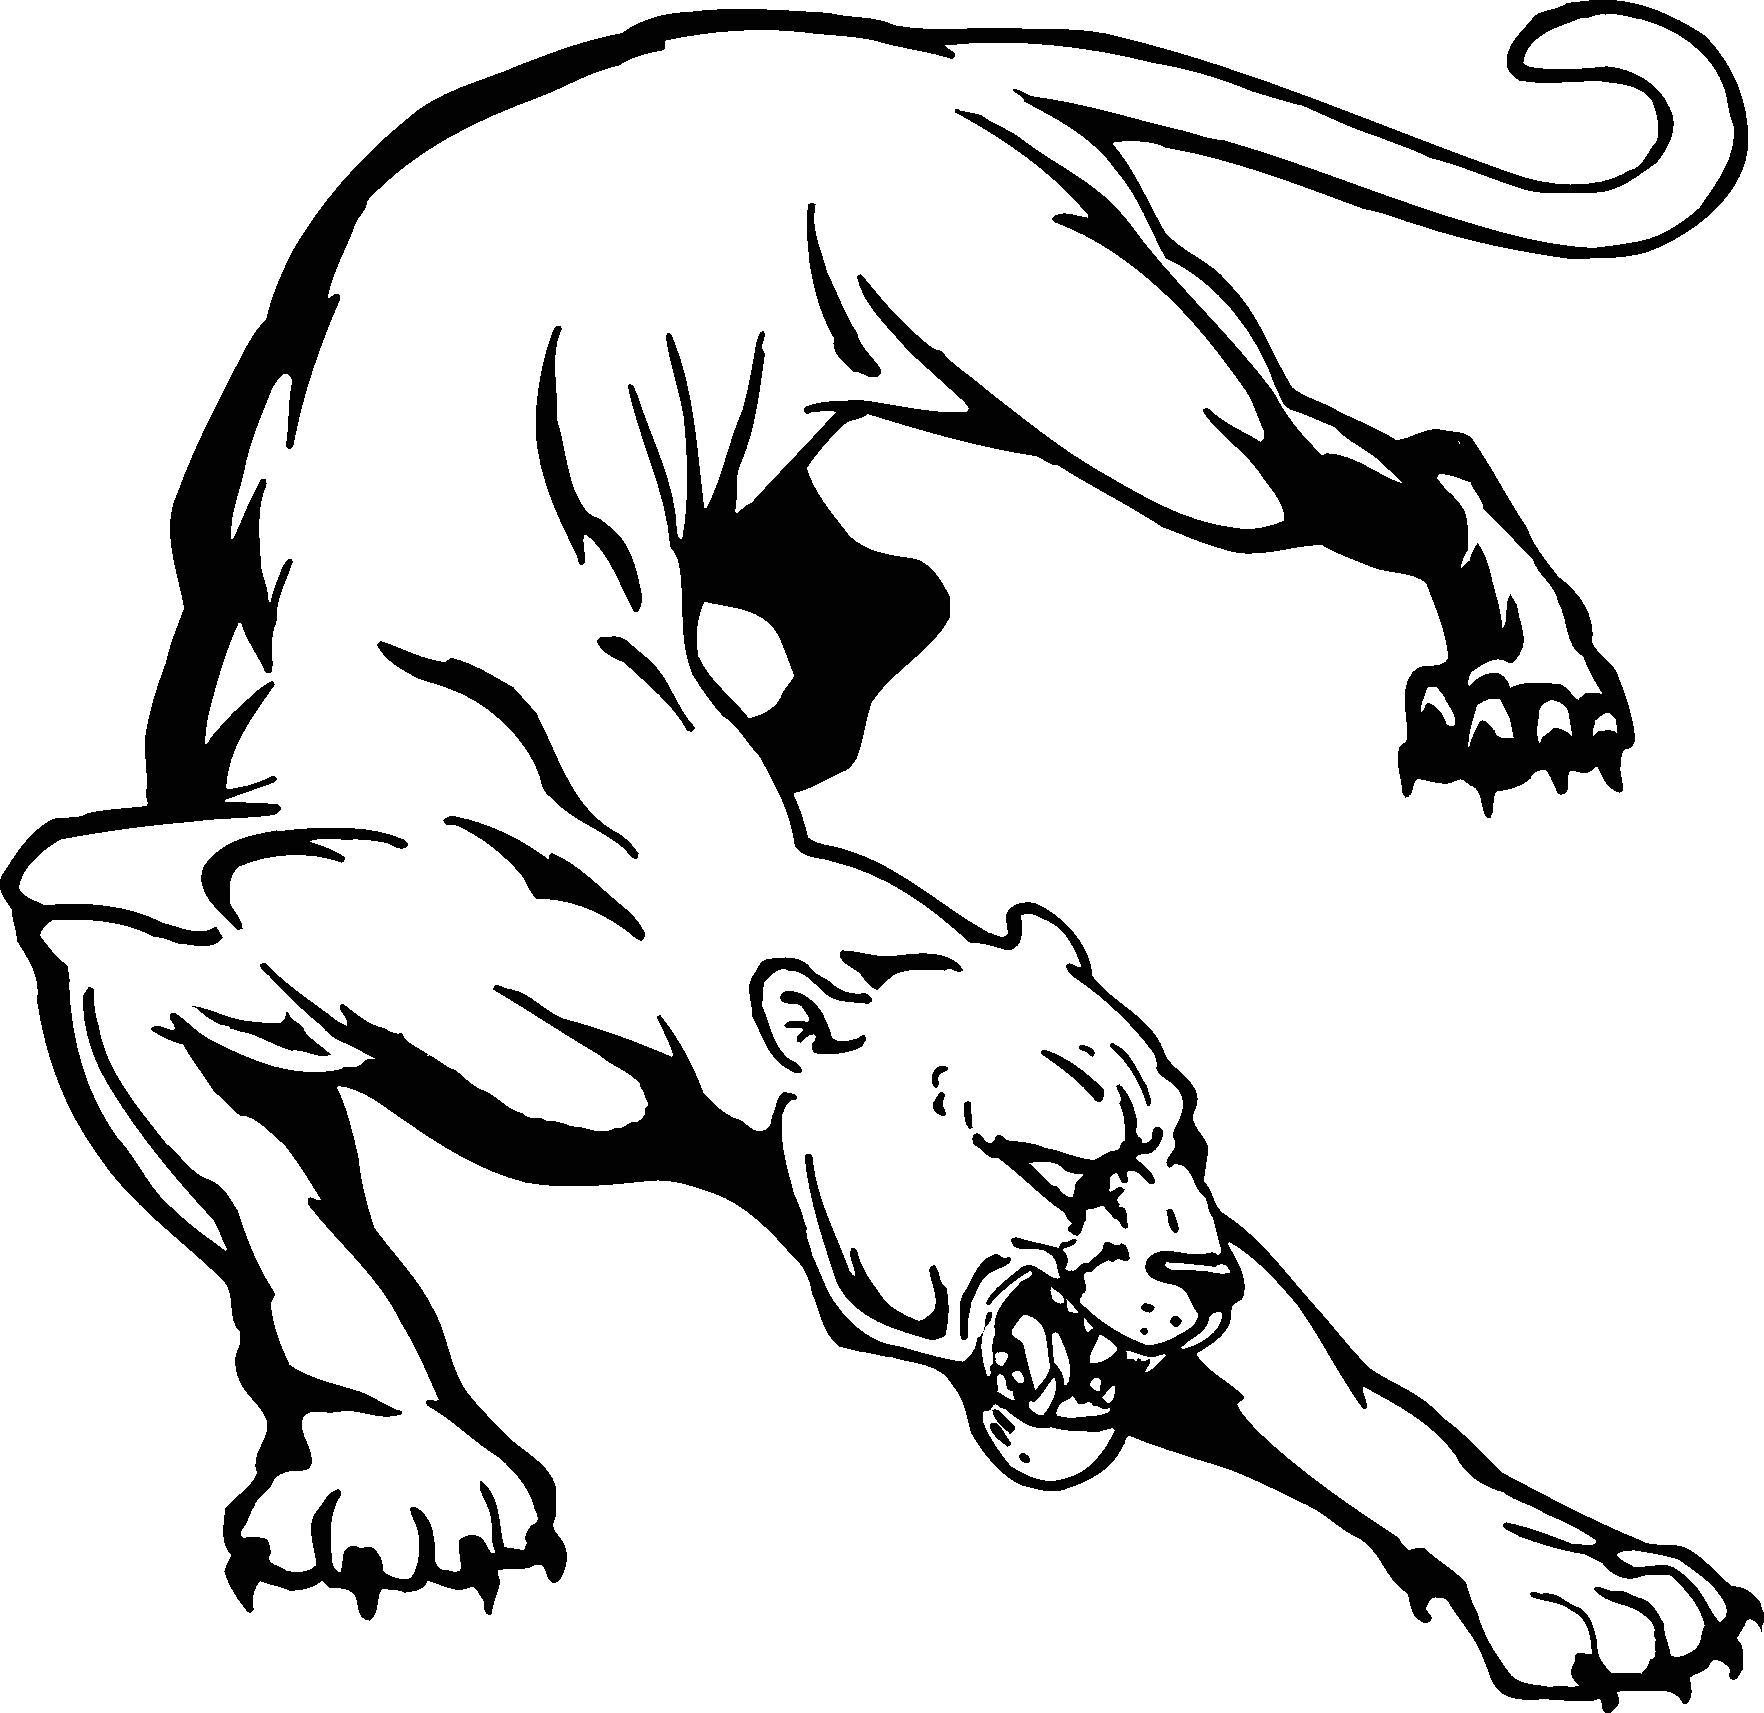 Black panther clip art free vector image 1 4